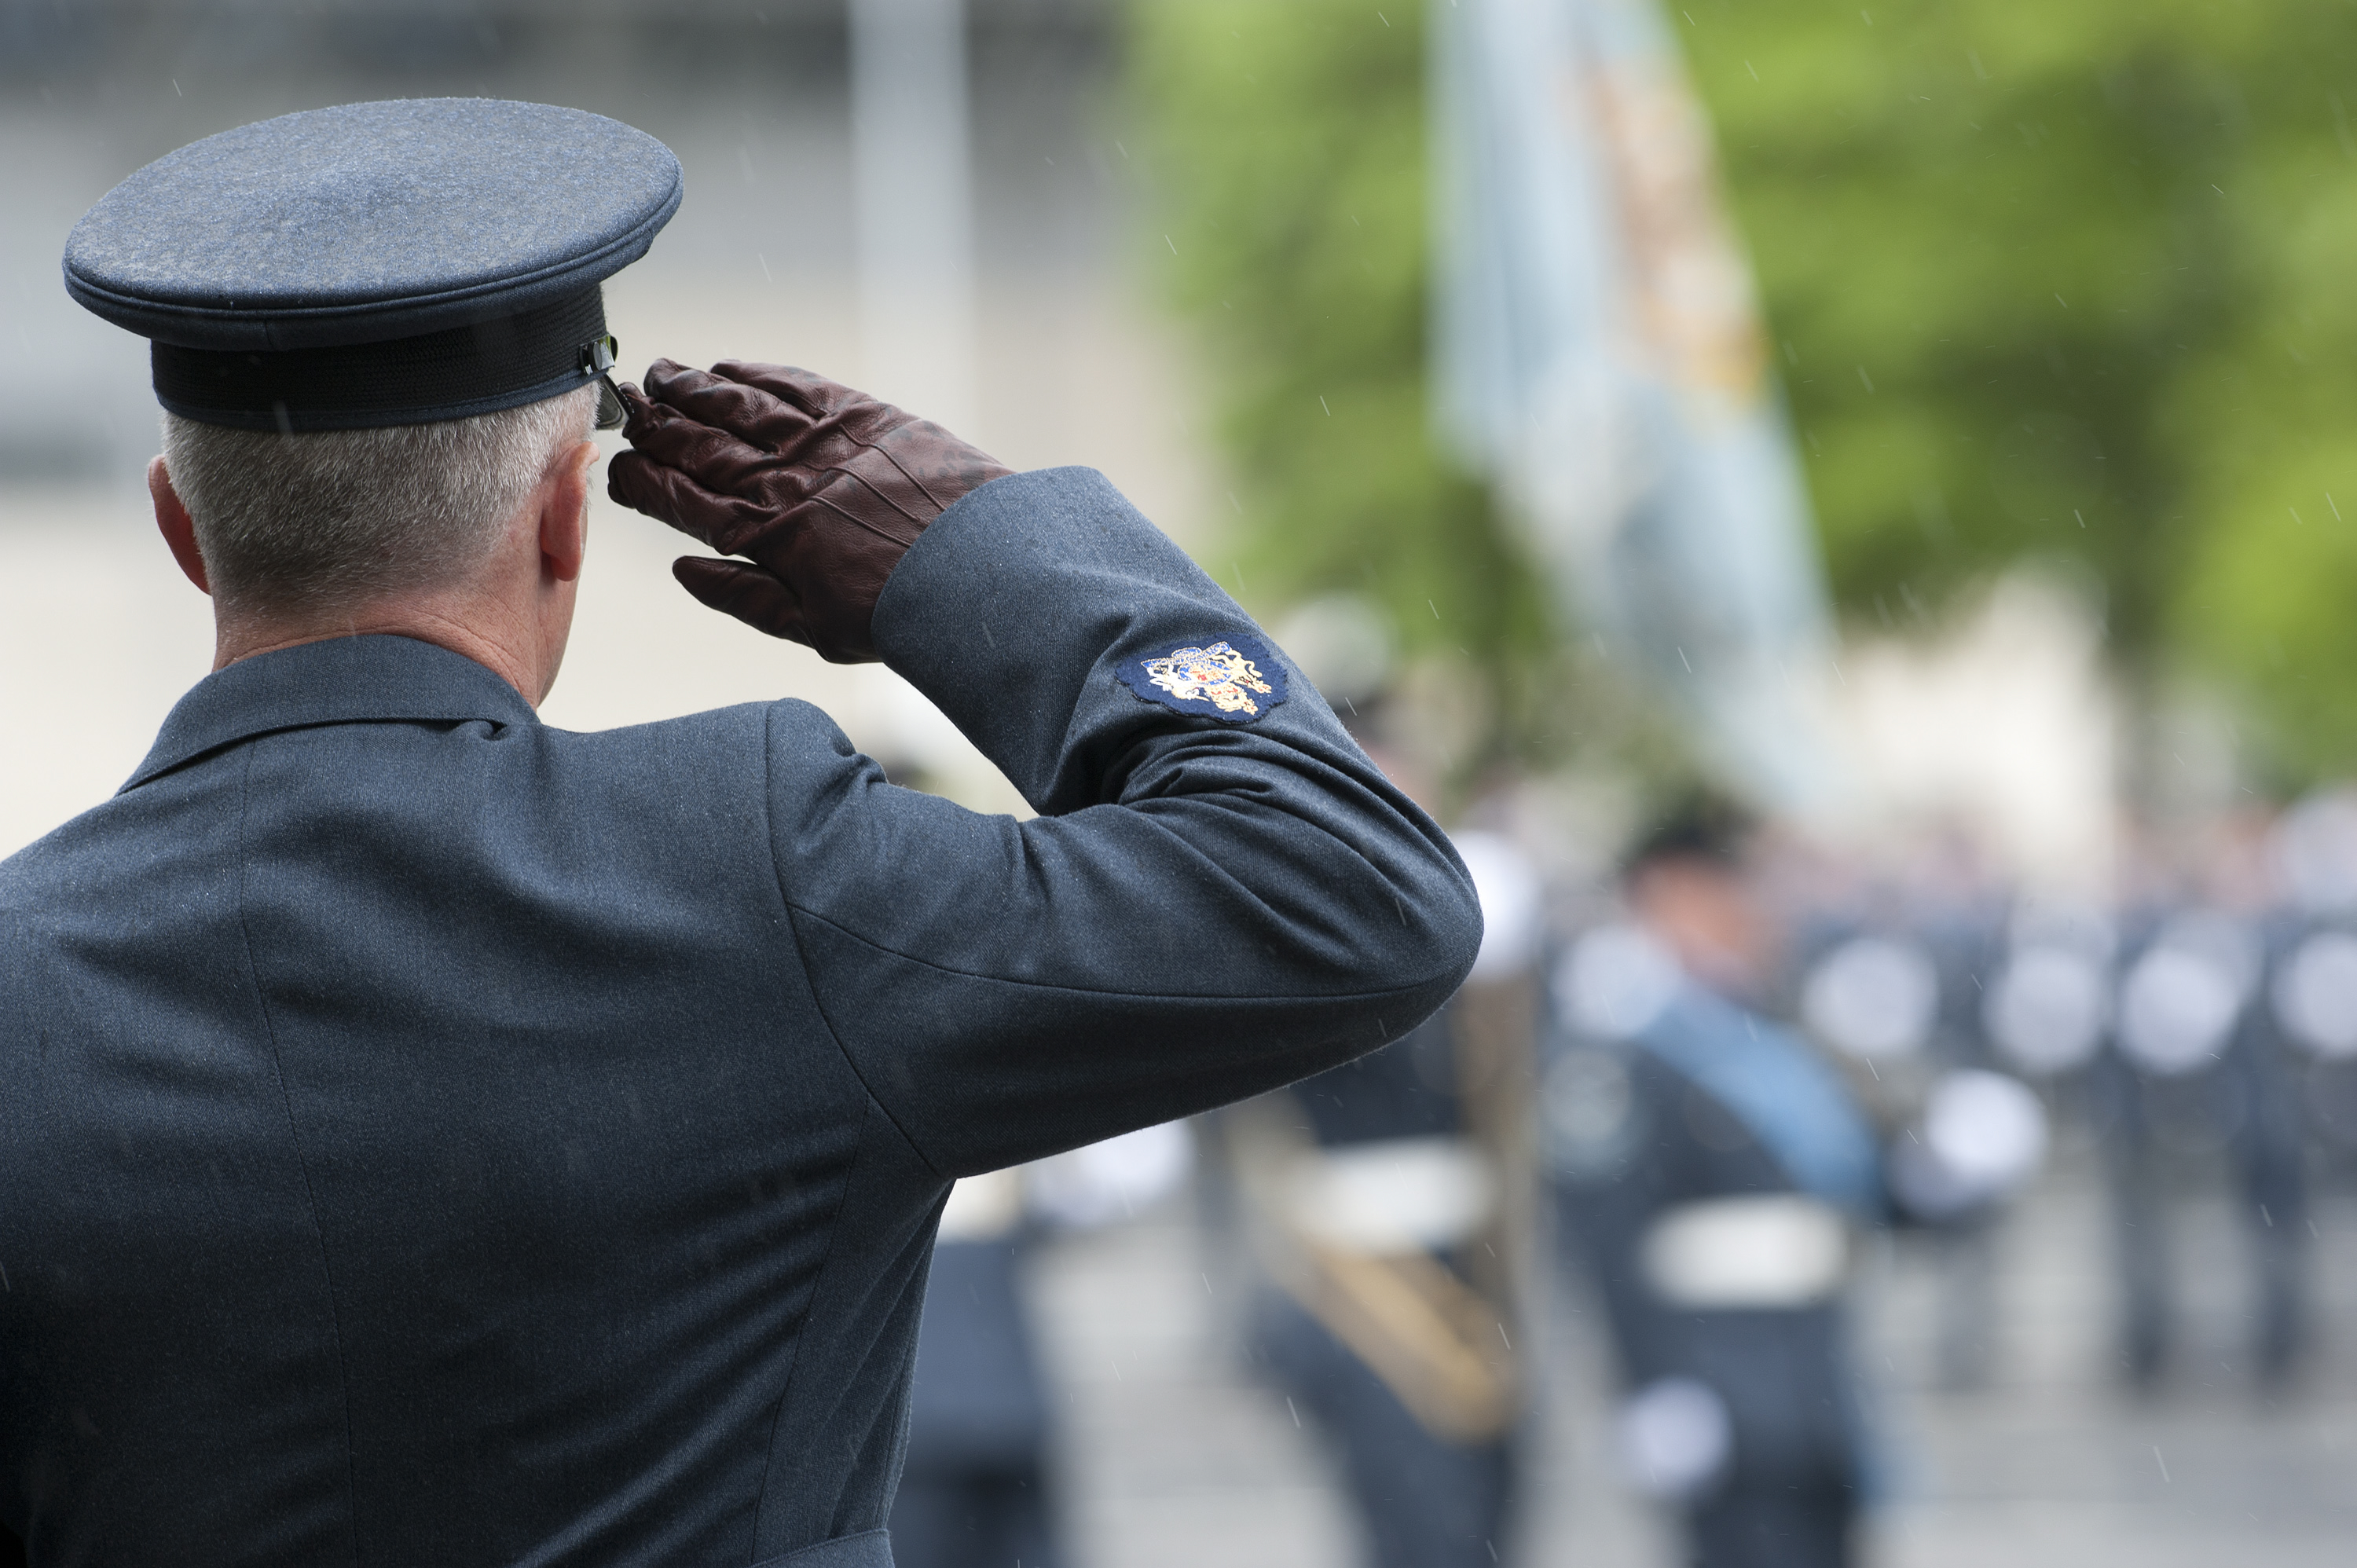 Personnel salutes, background is blurred out.